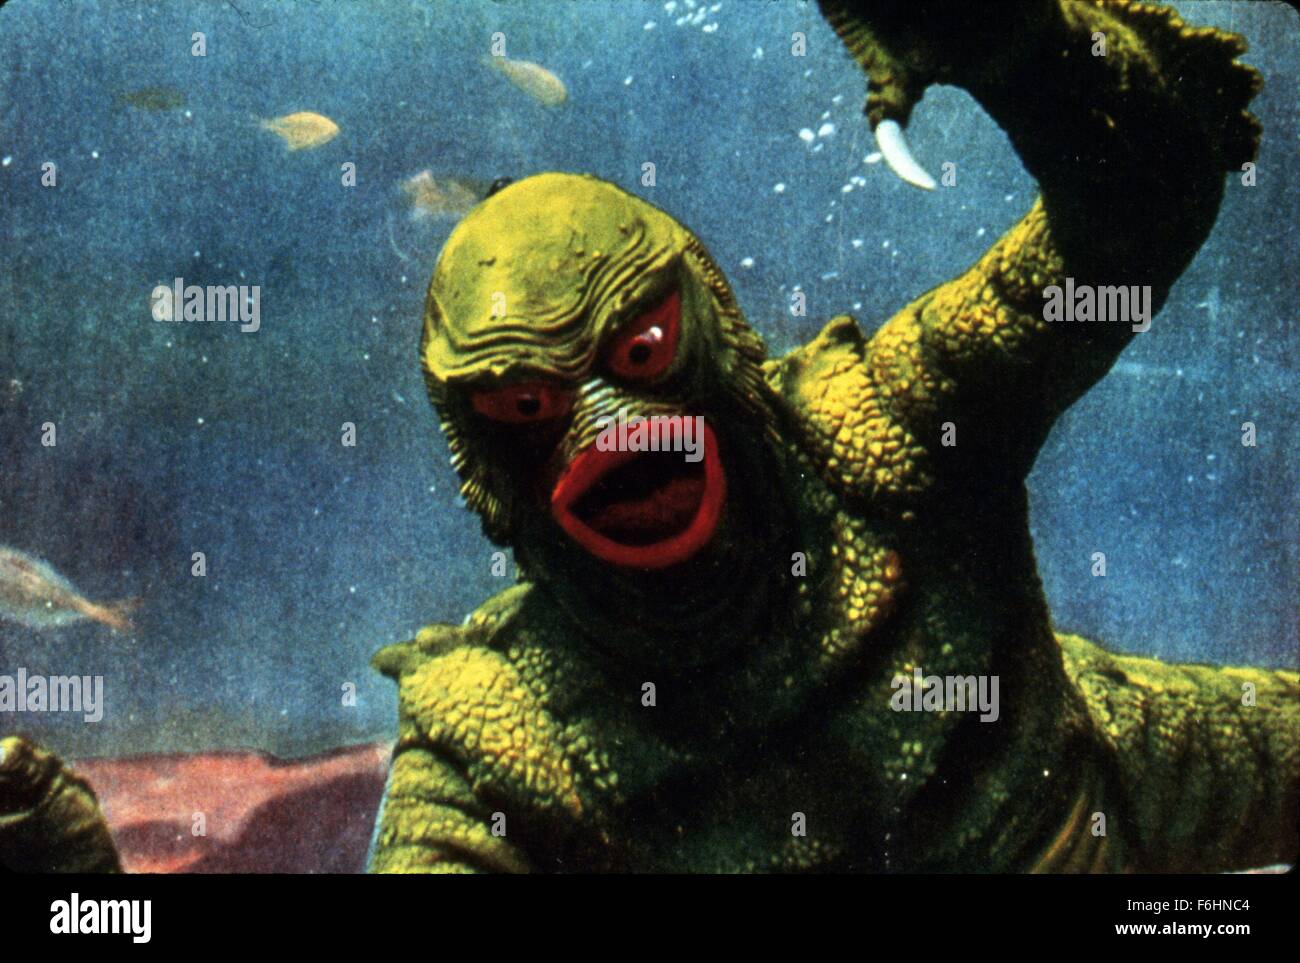 1955, Film Title: REVENGE OF THE CREATURE, Director: JACK ARNOLD, Studio: UNIV, Pictured: RICOU BROWNING, ITS & ALIENS! THINGS, UNDERWATER, SWIMMING, MONSTER, SEA MONSTER, ATTACKING, FISH. (Credit Image: SNAP) Stock Photo